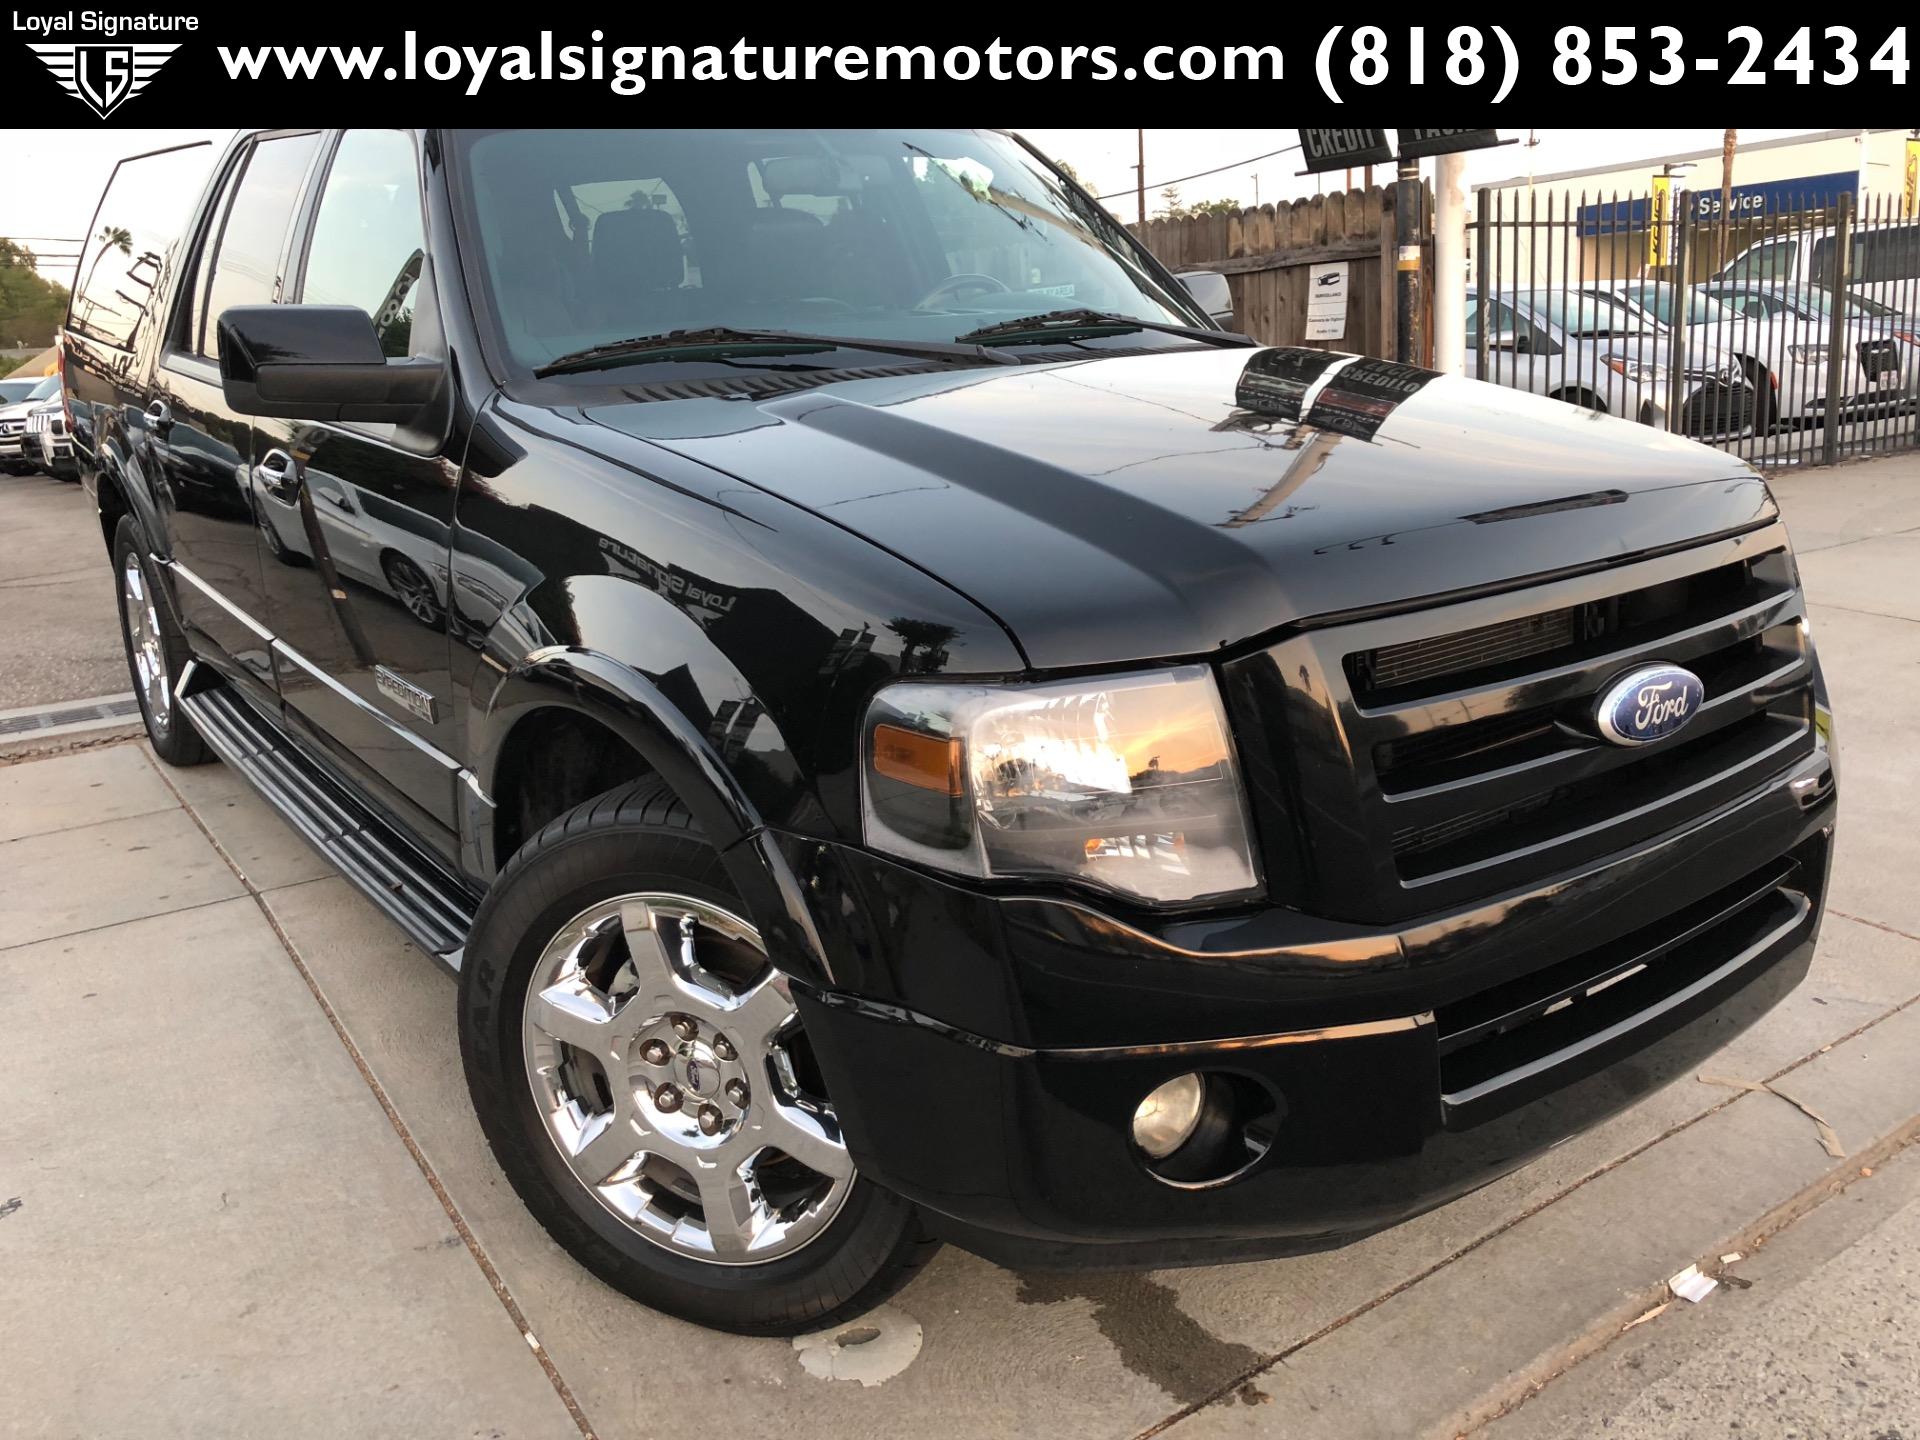 Used 2007 Ford Expedition El Limited For Sale 7 995